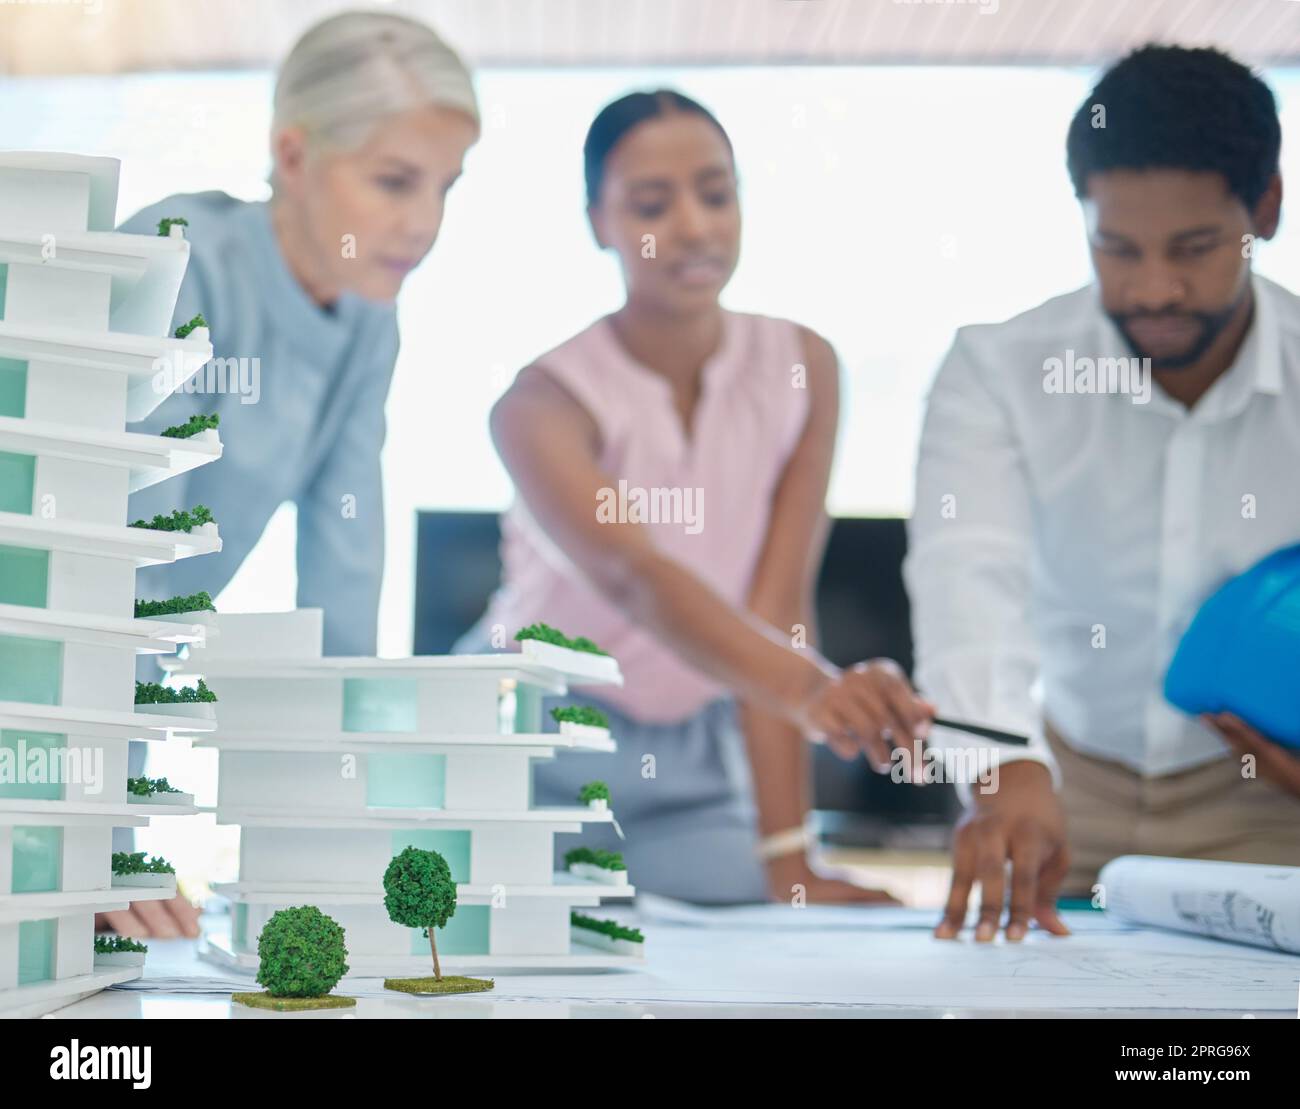 Architect or engineer team planning and designing a building in a meeting in the office or boardroom. City development planner or architecture group with a 3d model and working on a strategy Stock Photo